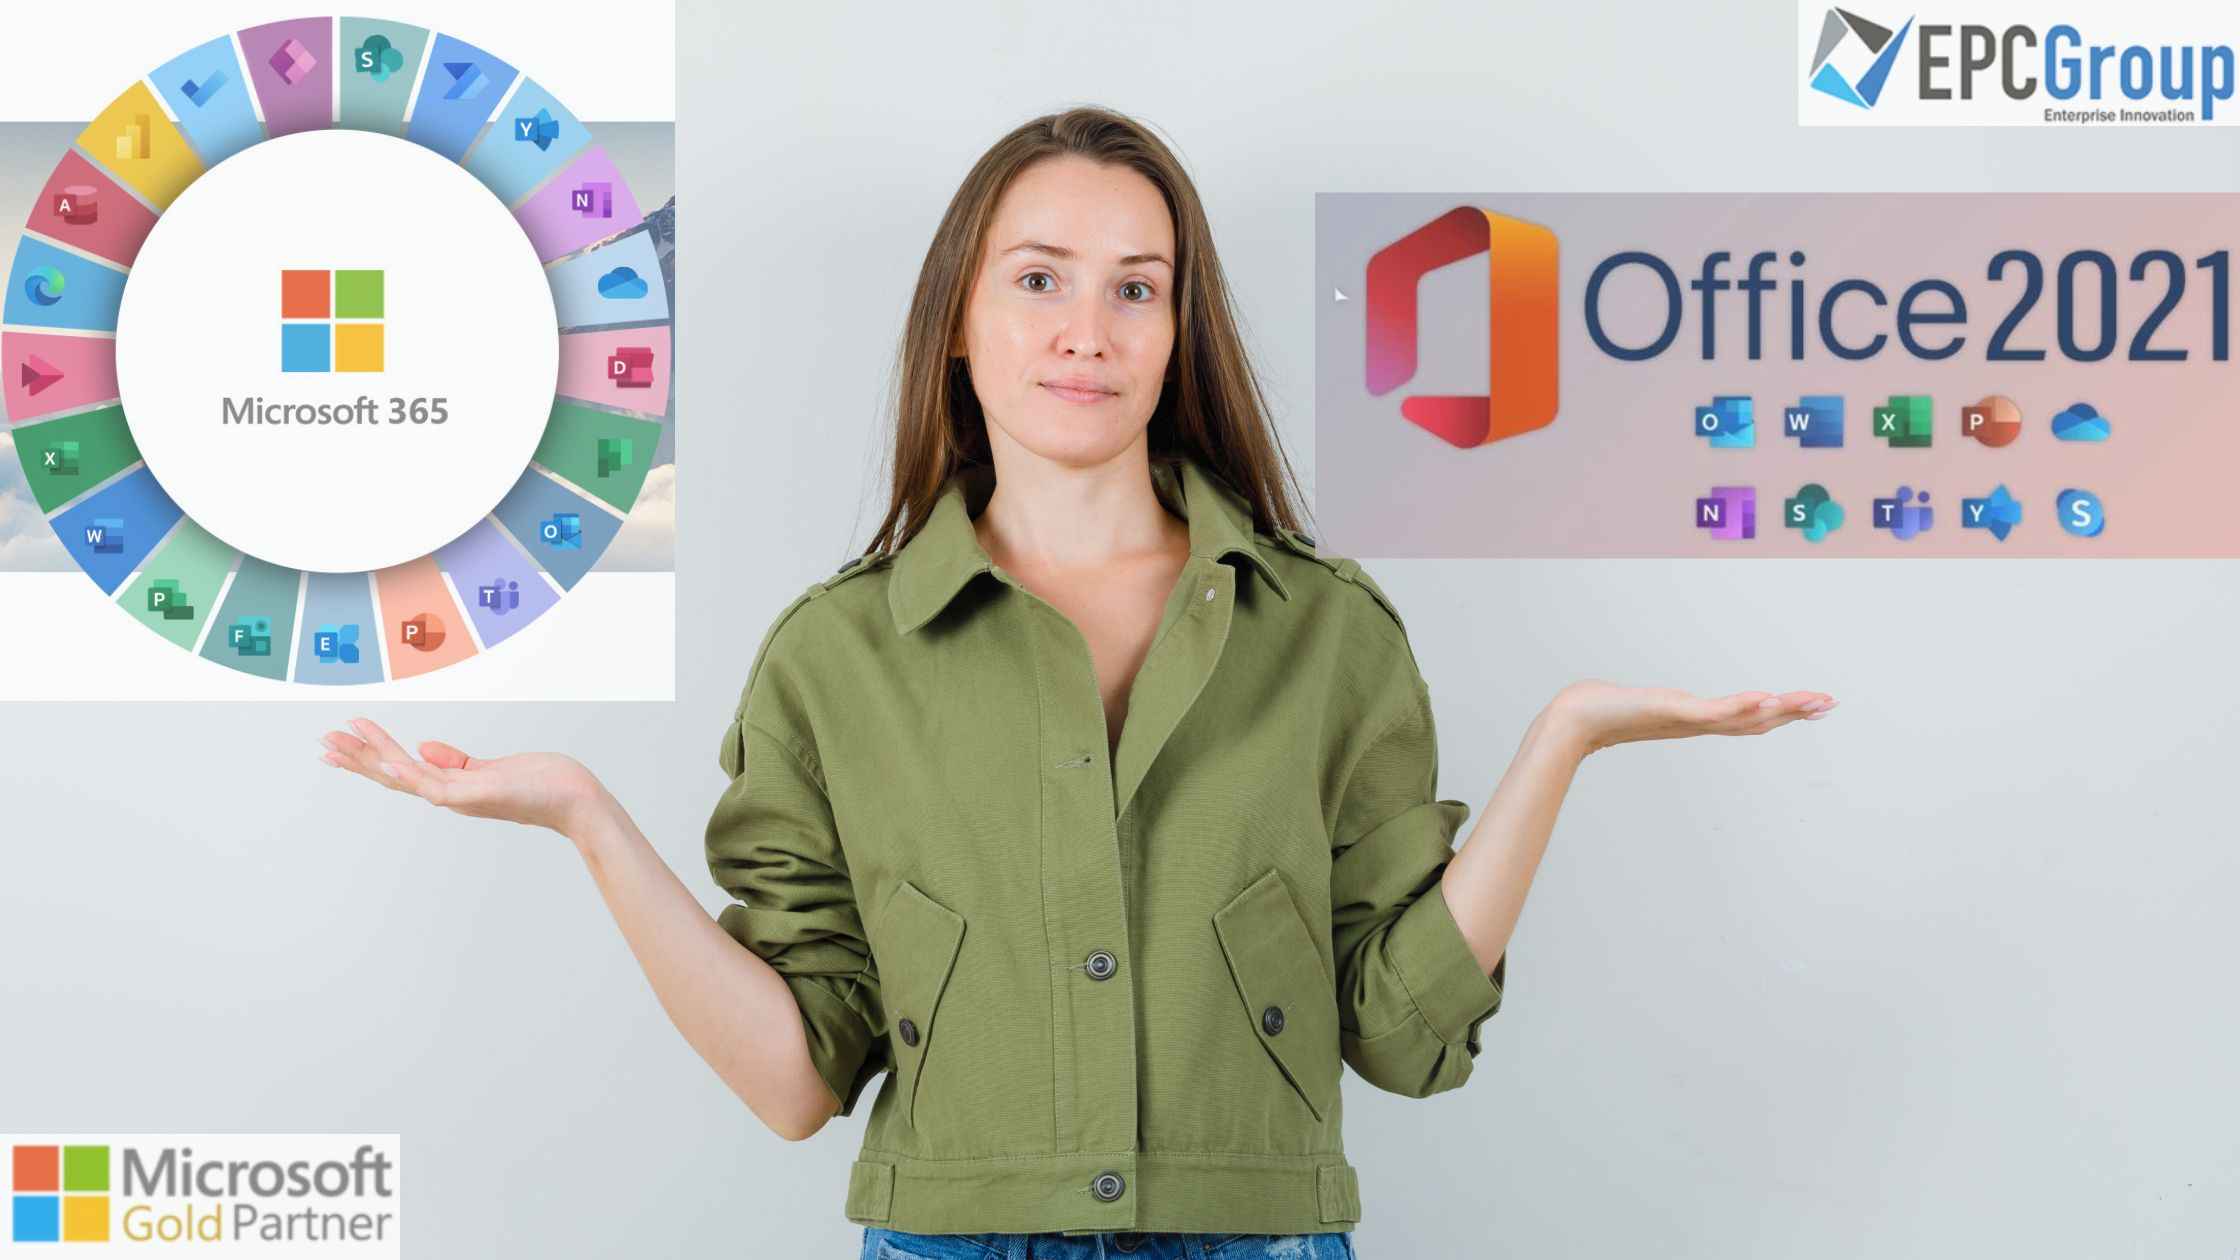 Microsoft 365 vs Office 2021: How To Choose The Right Product?